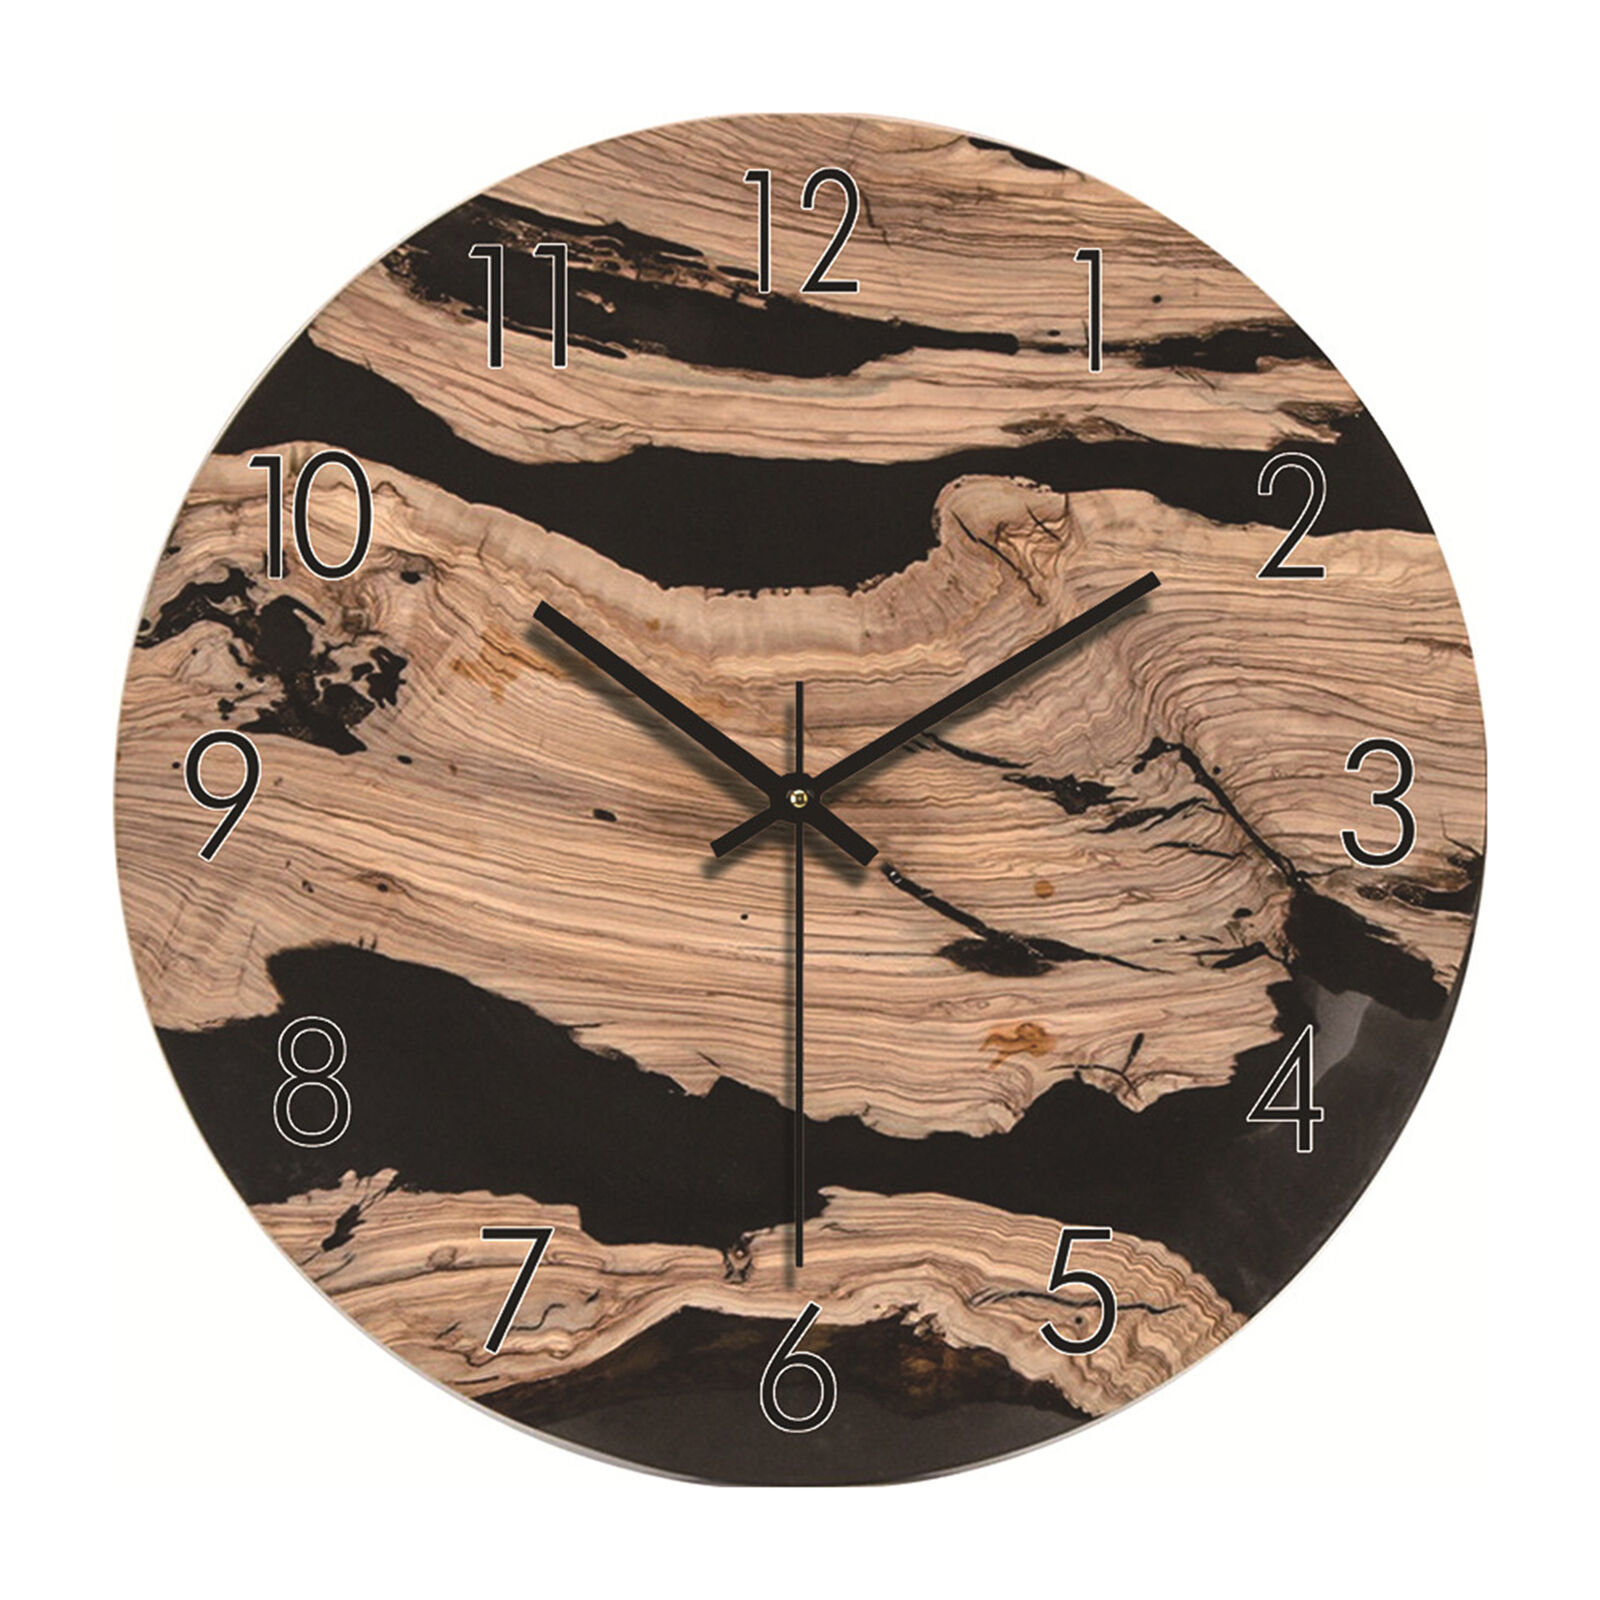 Vintage Farmhouse Clock Silent Sweep Movement Rustic Wood Grain Wall for Home